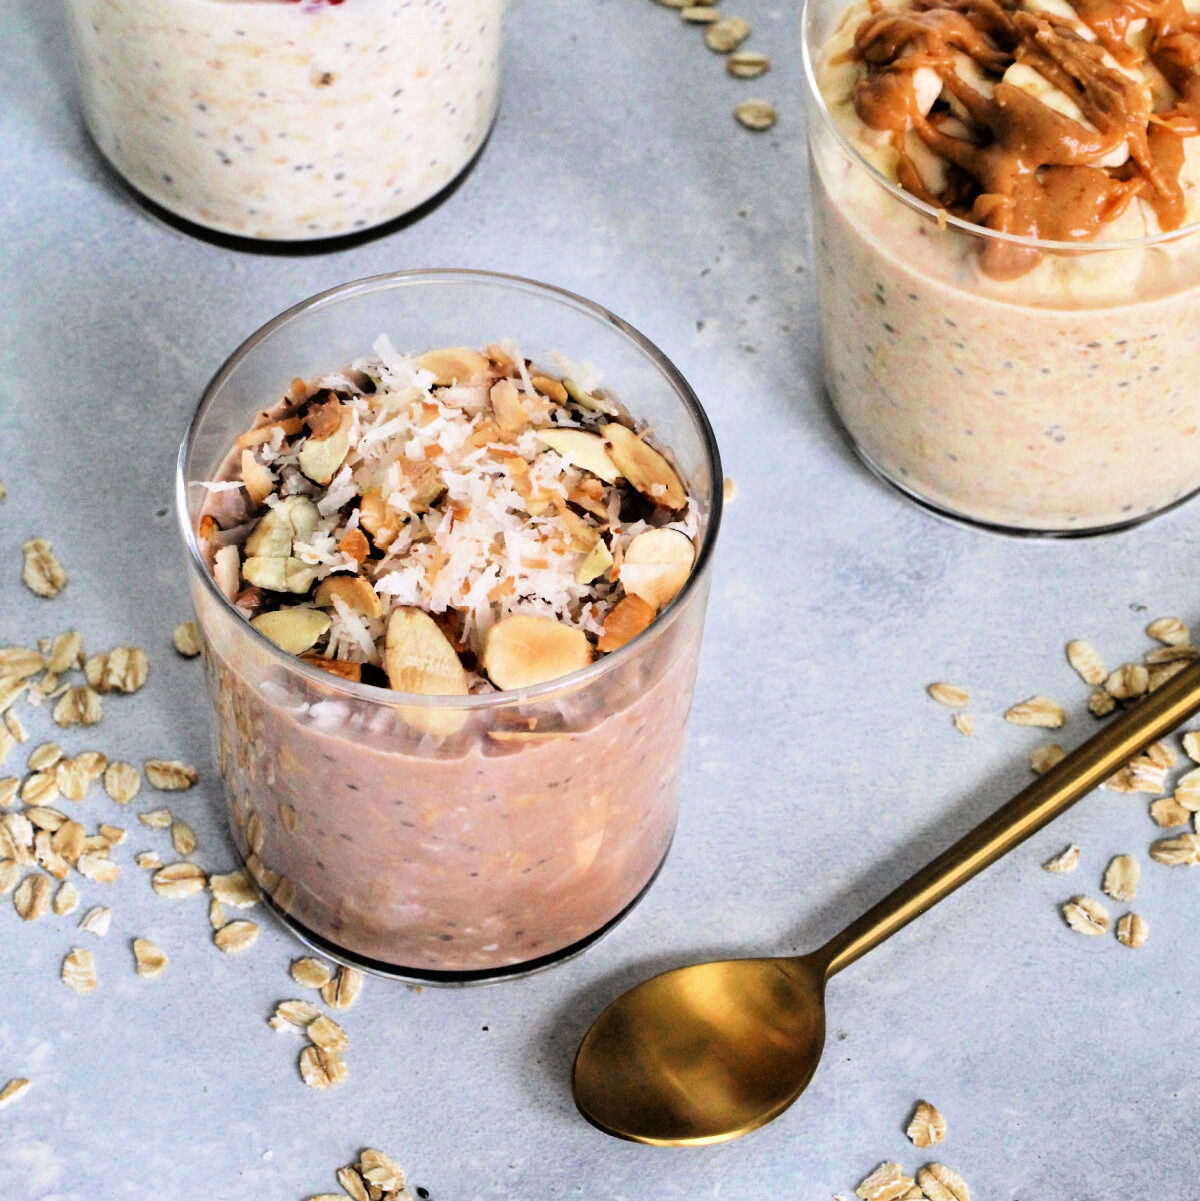 Varieties of protein overnight oats with a gold spoon.